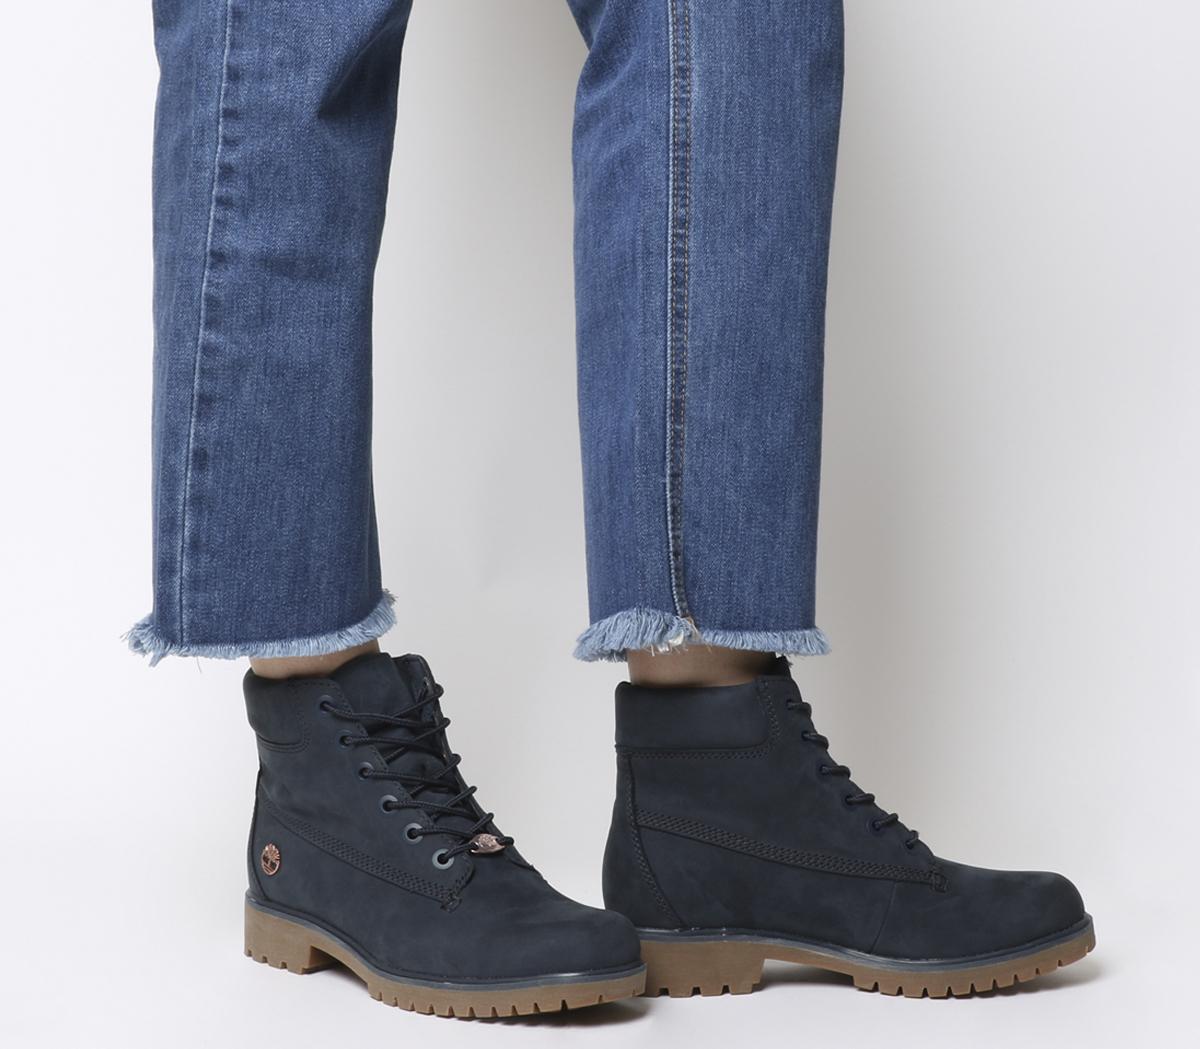 navy blue 6 inch timberland boots